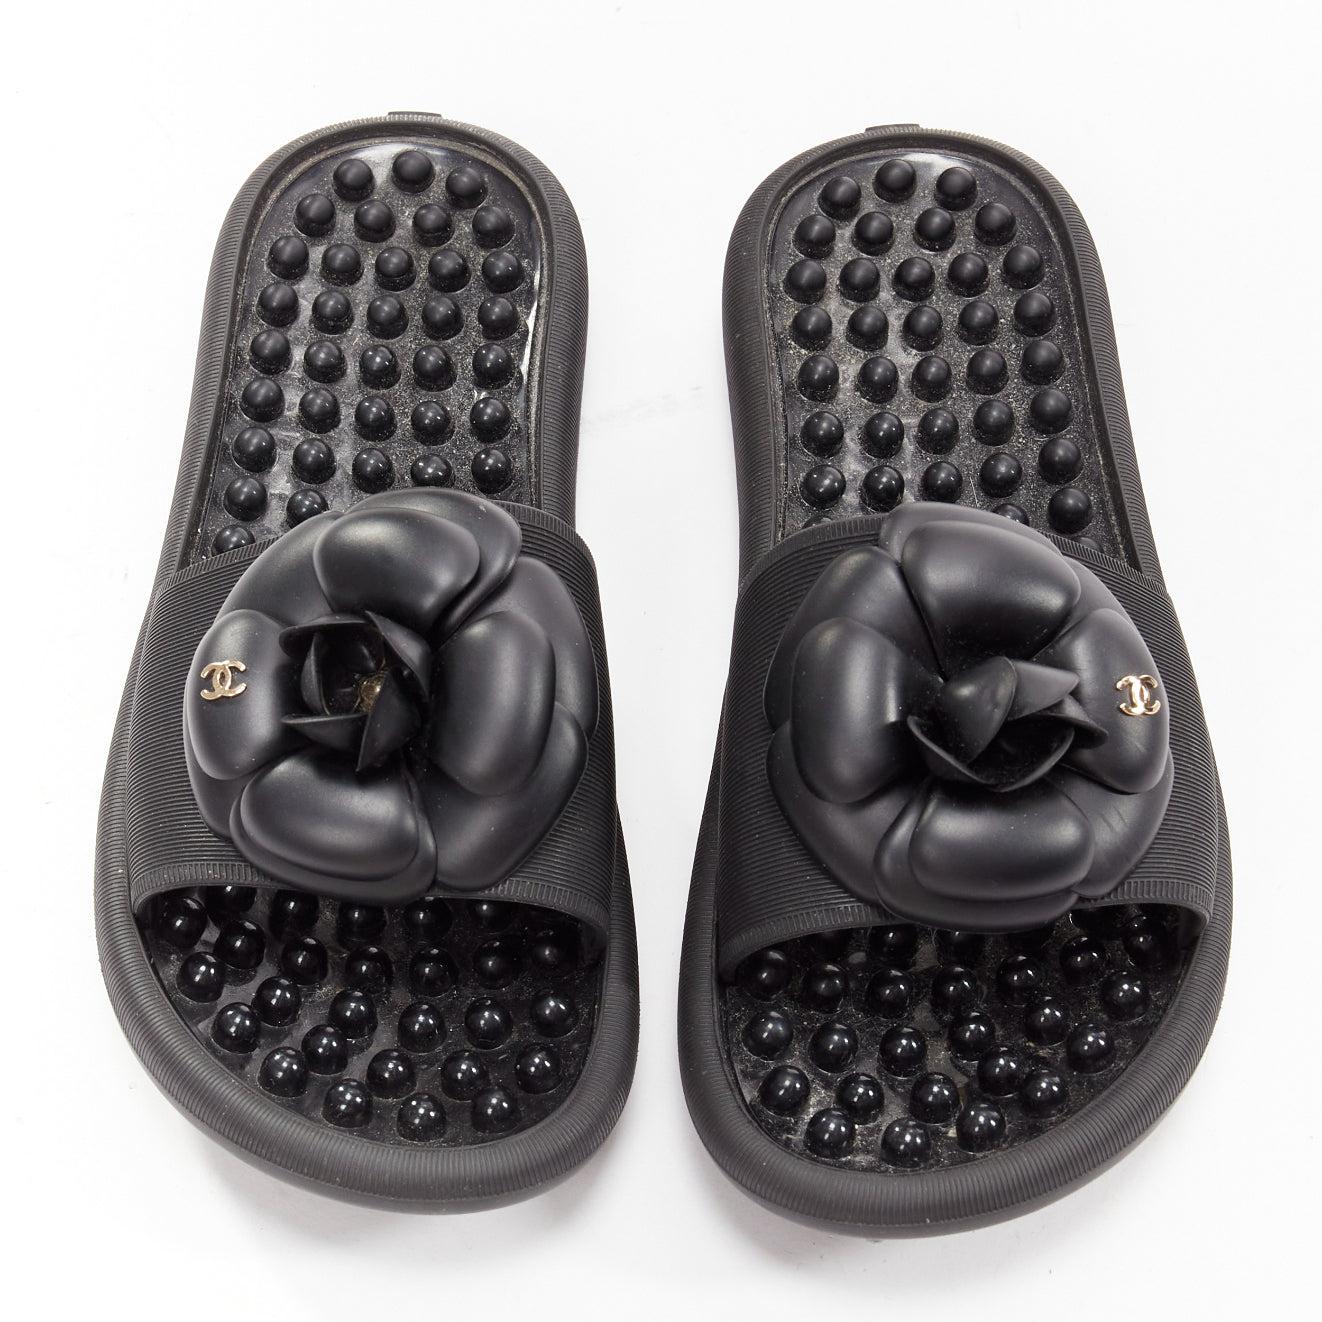 CHANEL black CC logo camellia pebbled insole thermoplastic slippers EU36
Reference: YIKK/A00039
Brand: Chanel
Material: Rubber, Metal
Color: Black, Silver
Pattern: Solid
Closure: Slip On
Lining: Black Rubber
Extra Details: CC logo plate with black